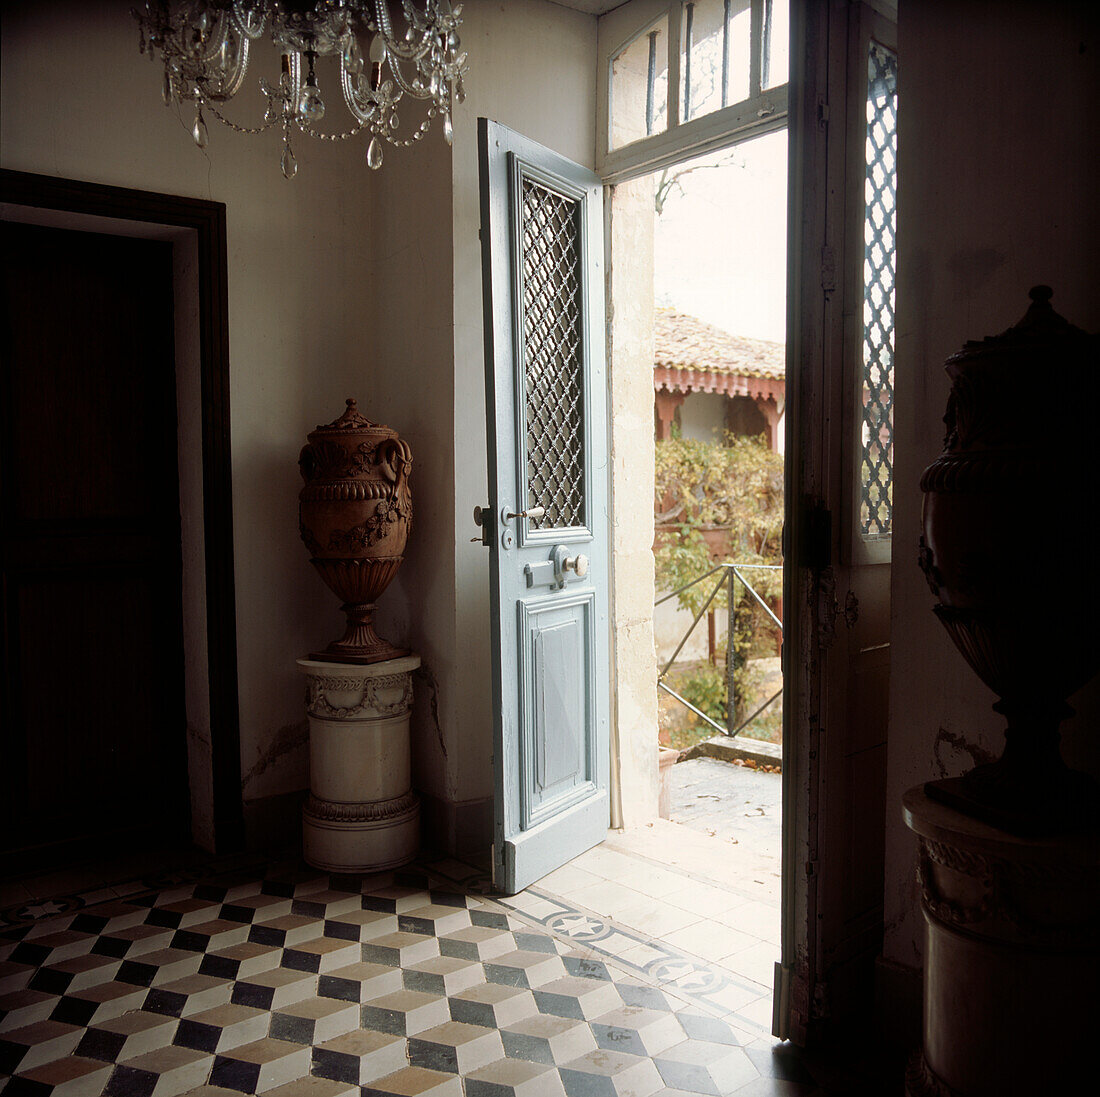 Entrance hall of a period French chateau with open double front doors and checked stone floor